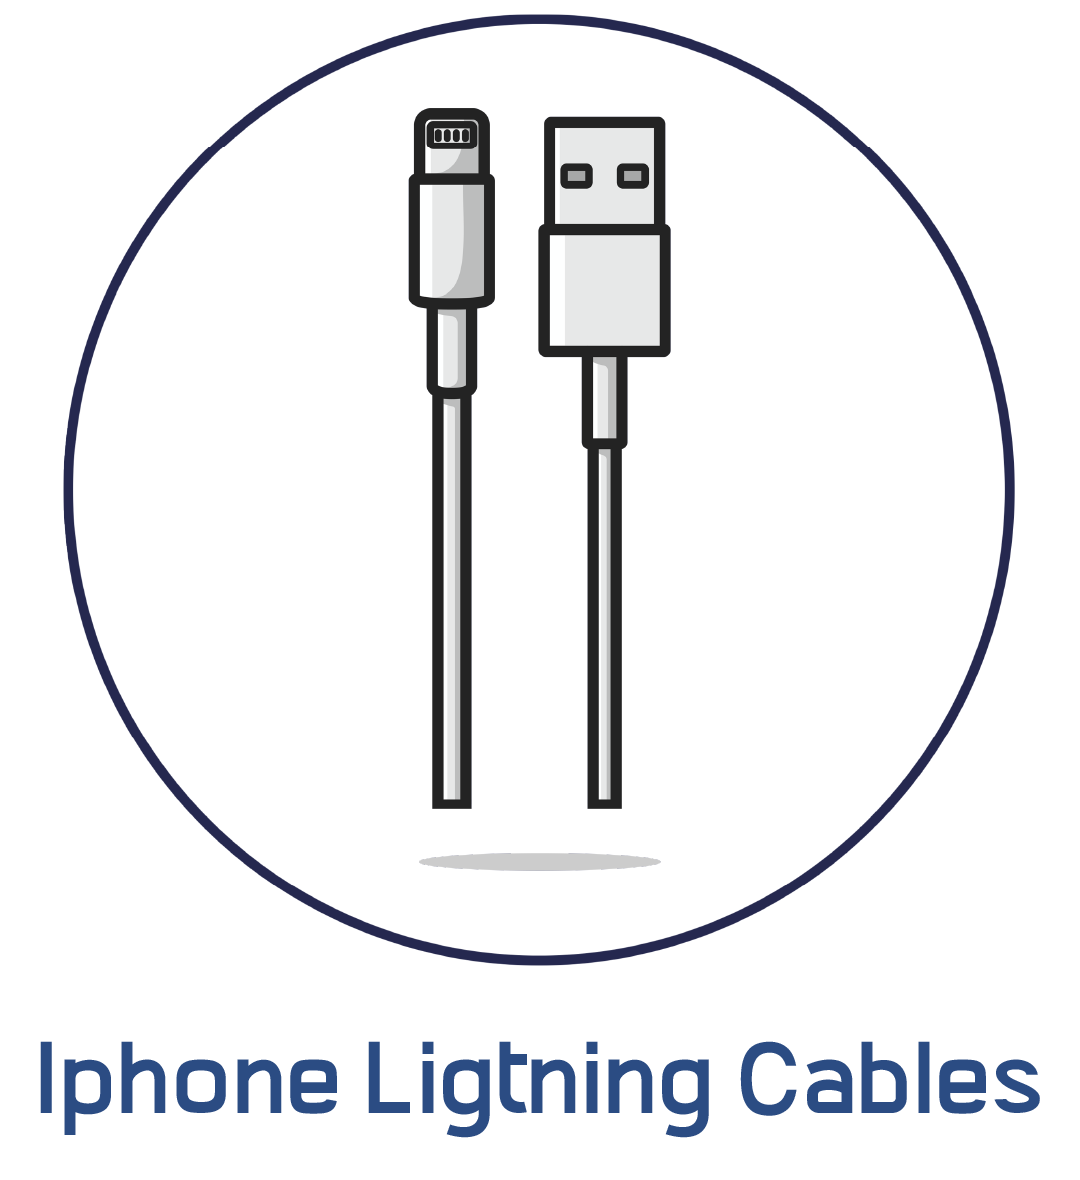 Iphone Lightning cables